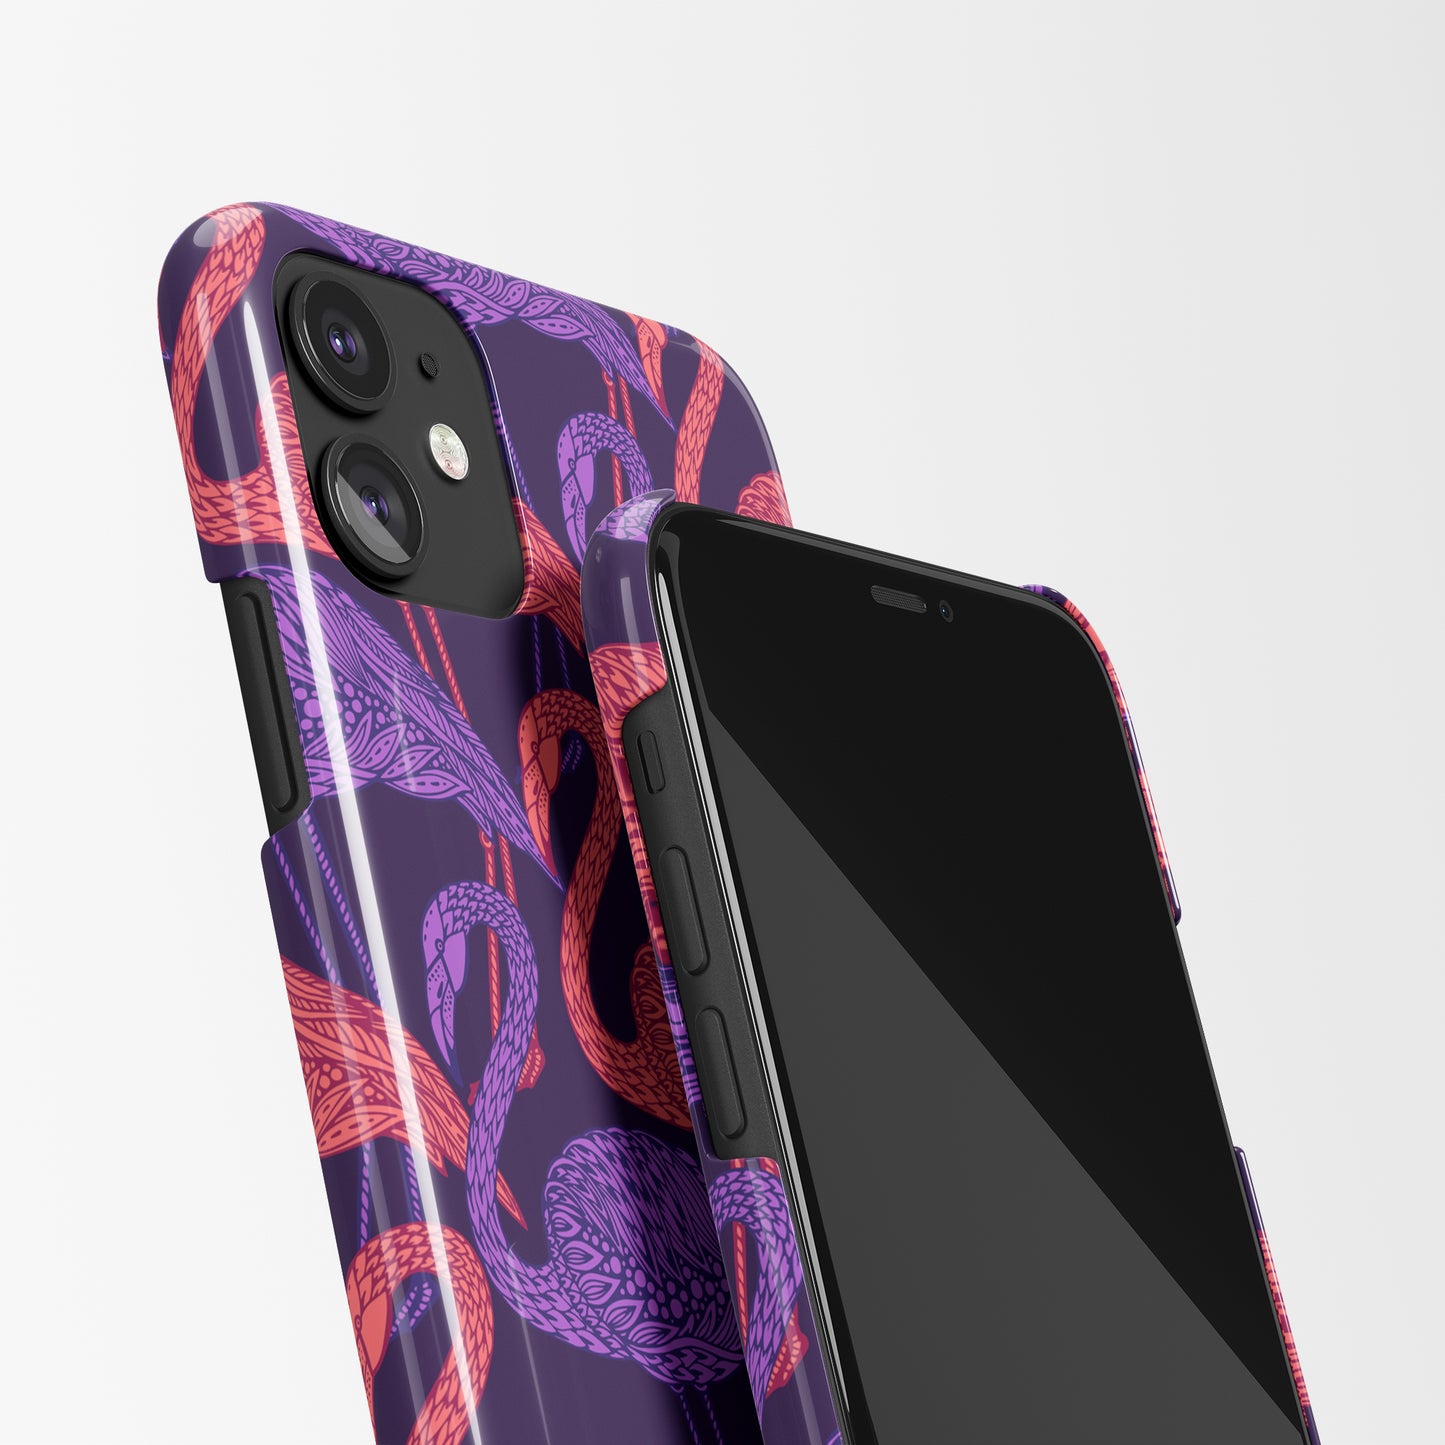 iPhone Case with Synthwave Flamingo